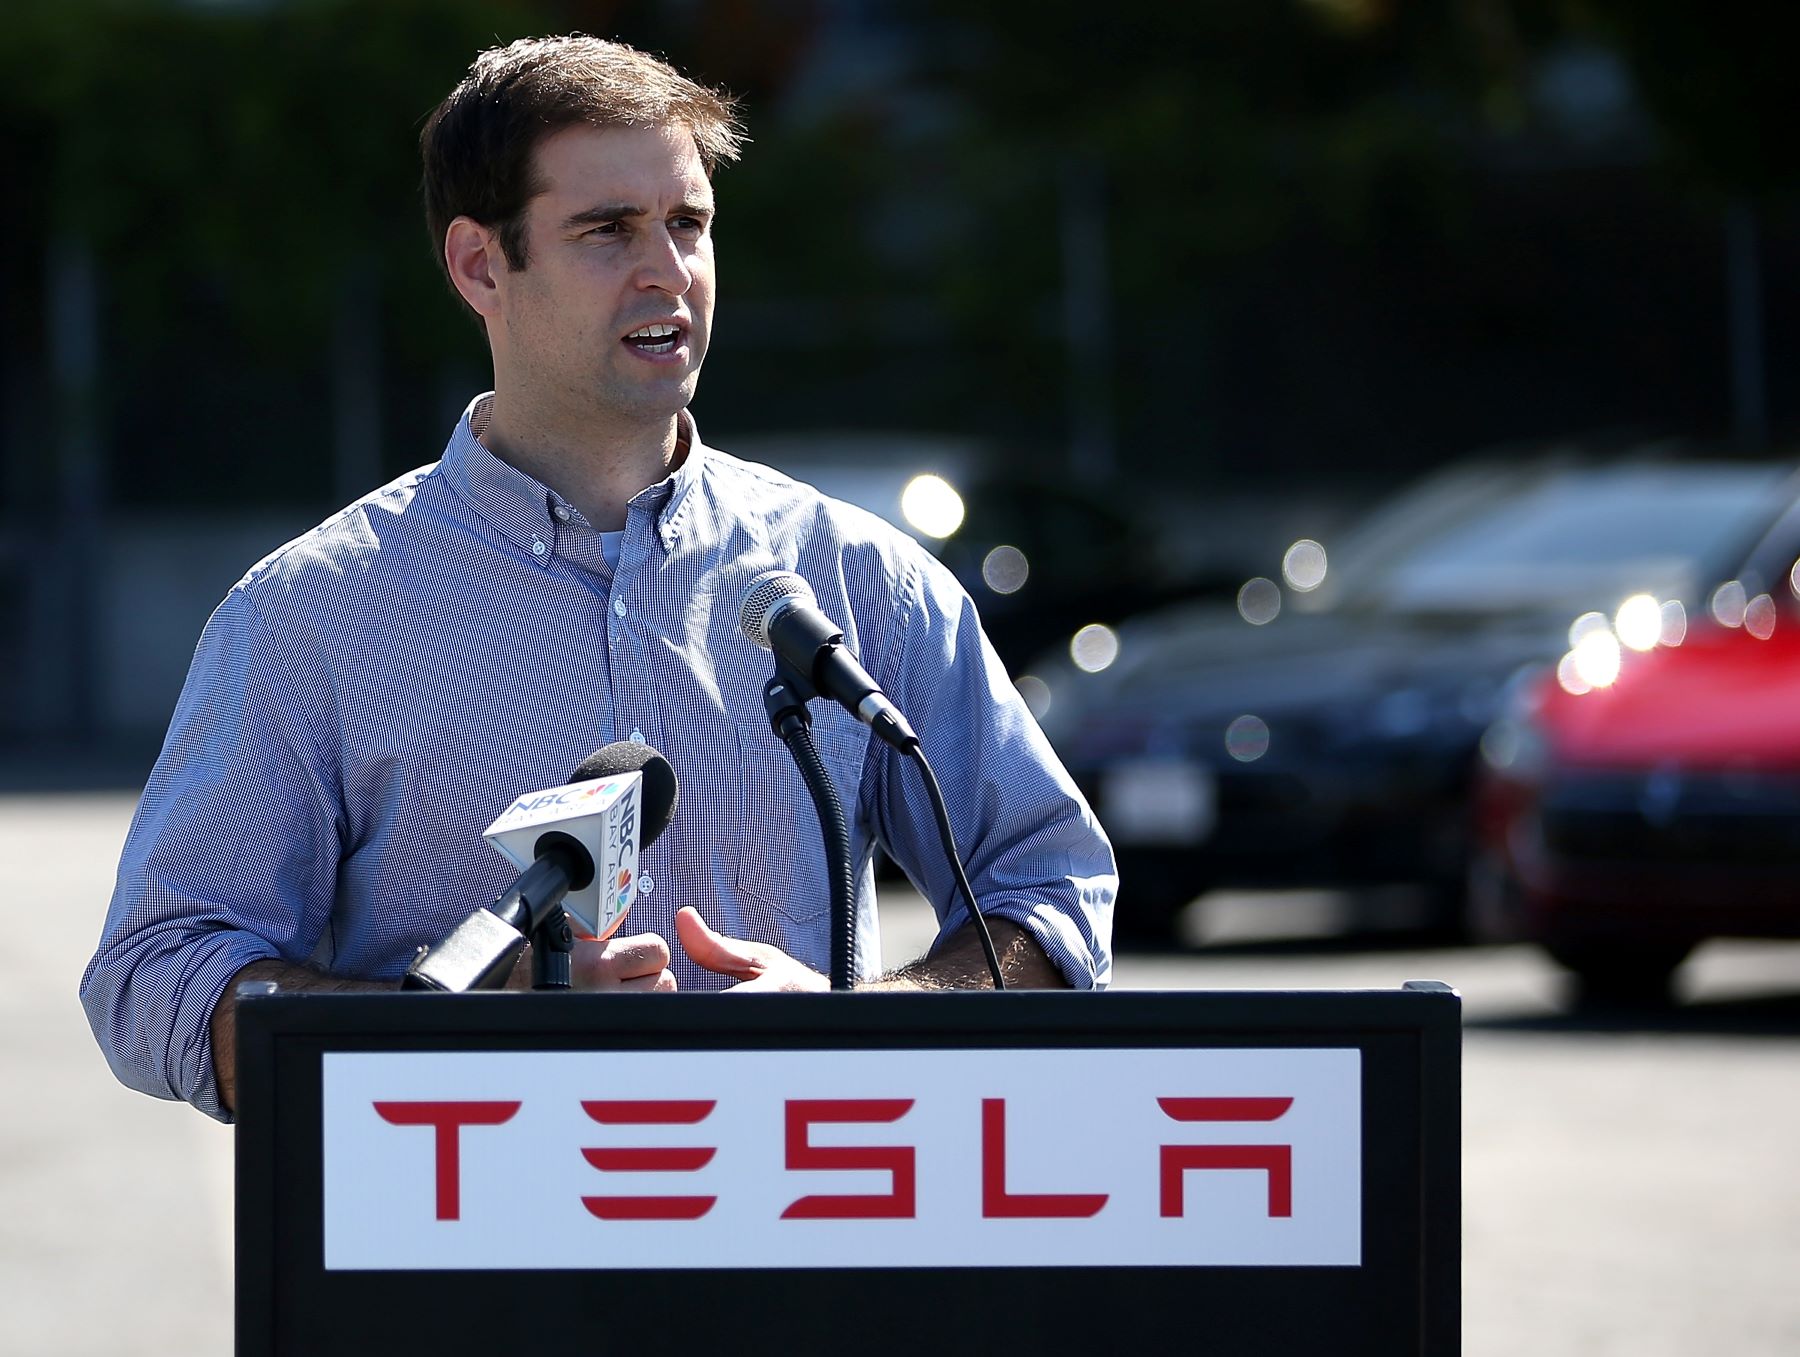 Tesla co-founder and former Chief Technical Officer (CTO) JB Straubel at the opening of a new Supercharger station